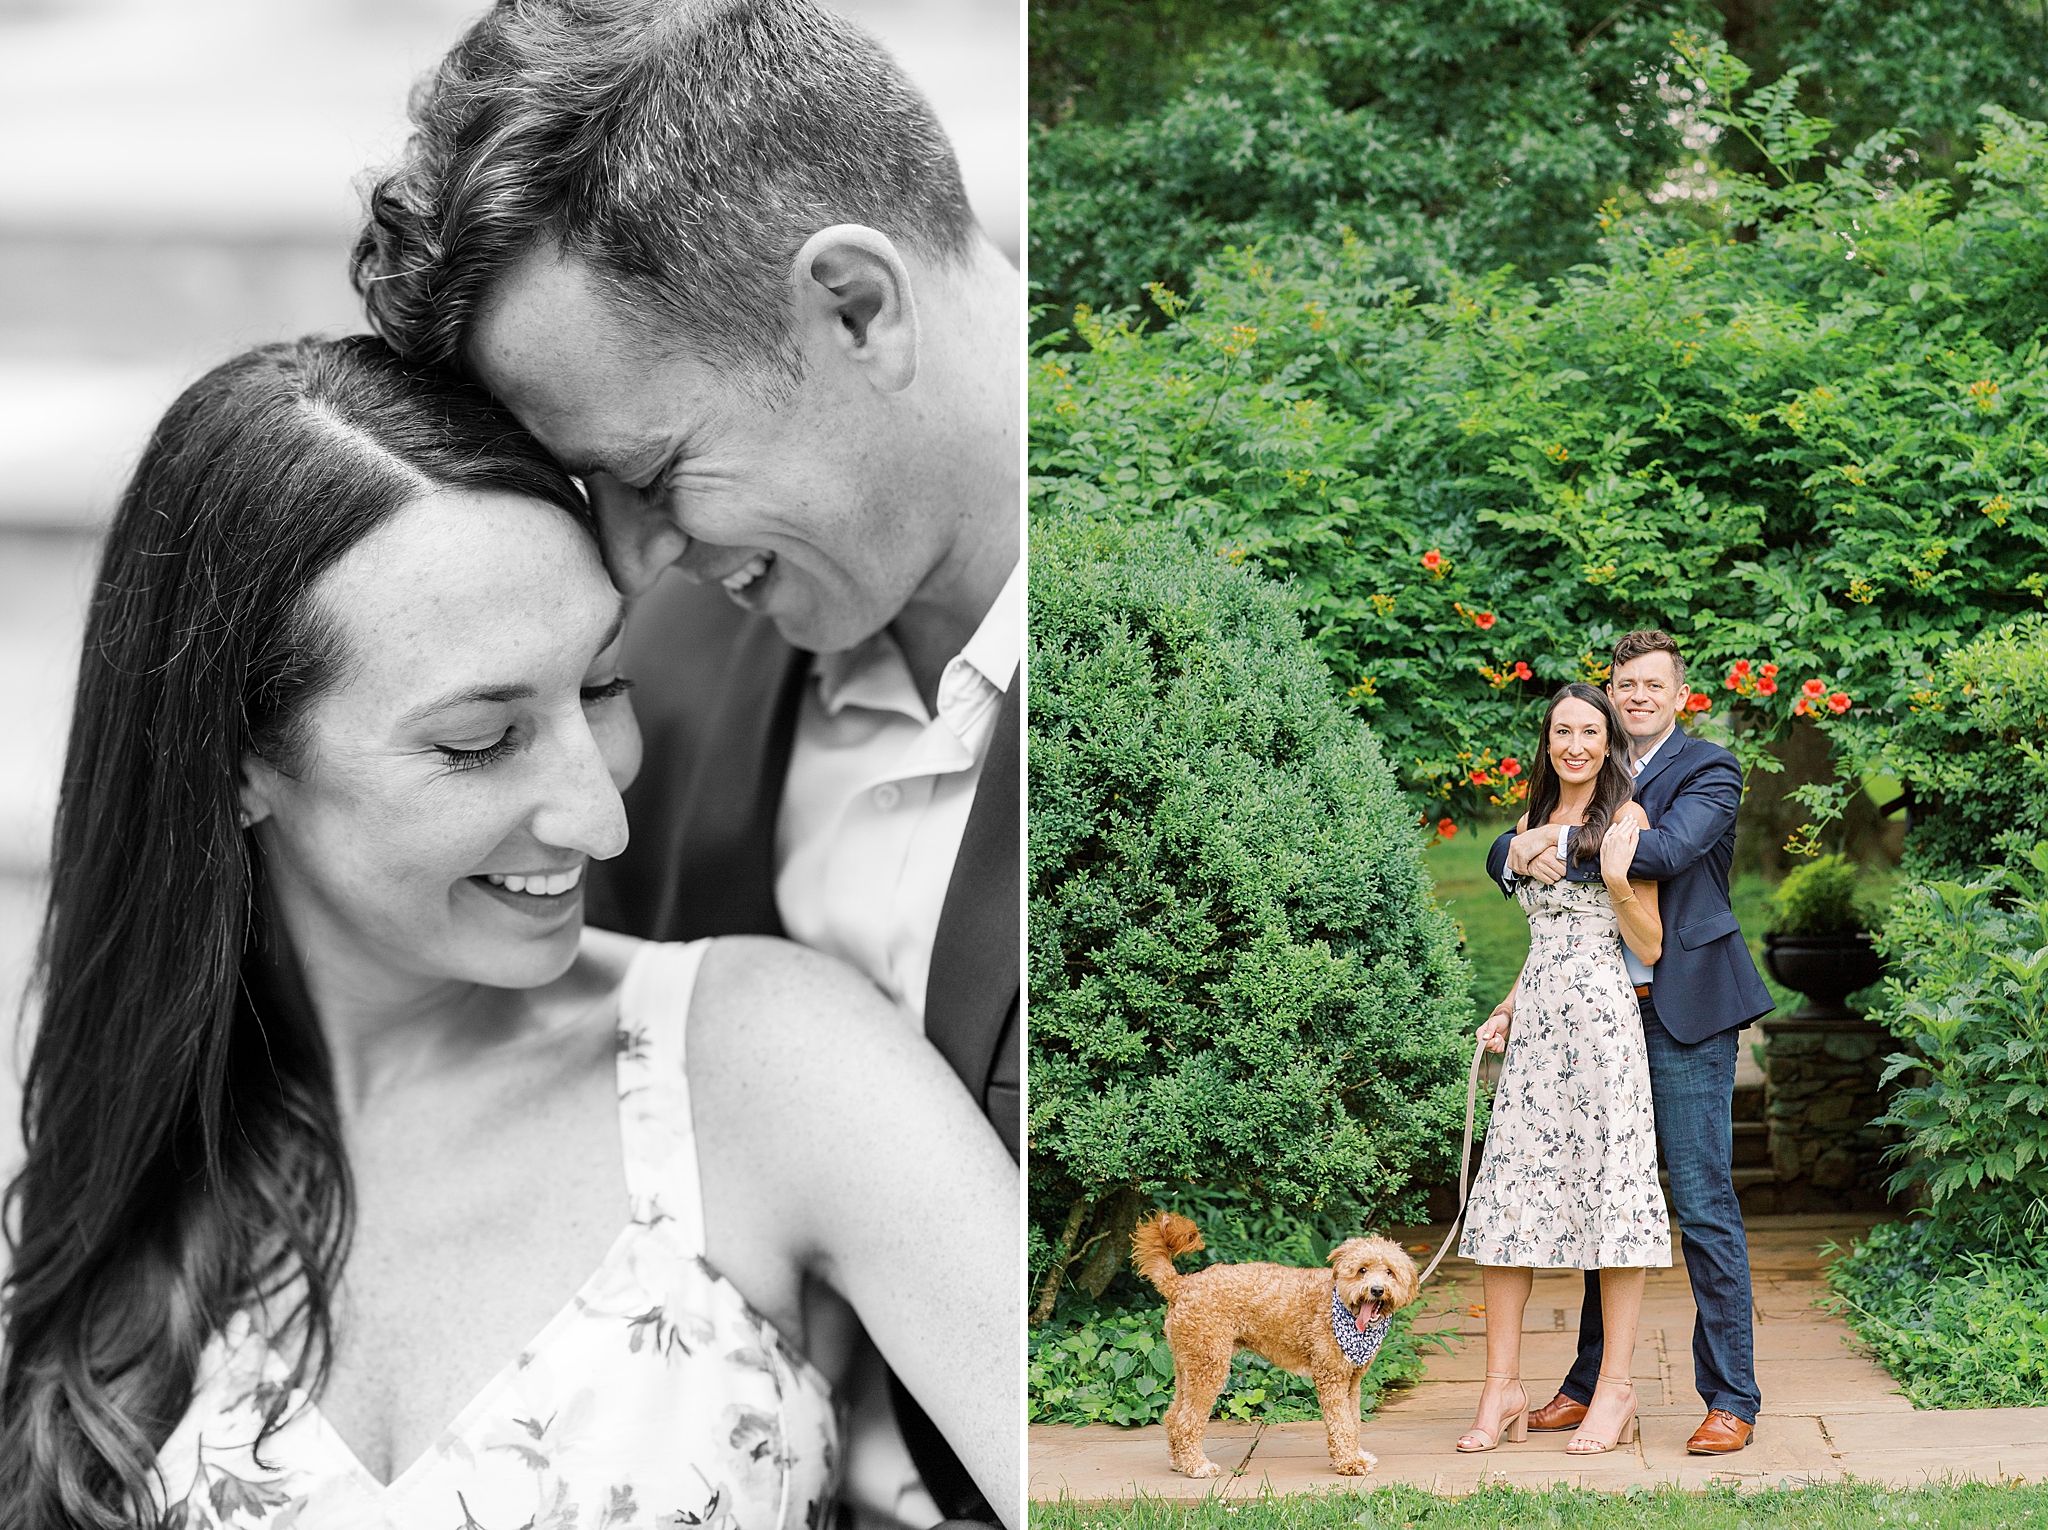 An elegant garden engagement session at Airlie Center in Warrenton, VA featuring a goldendoodle puppy. 